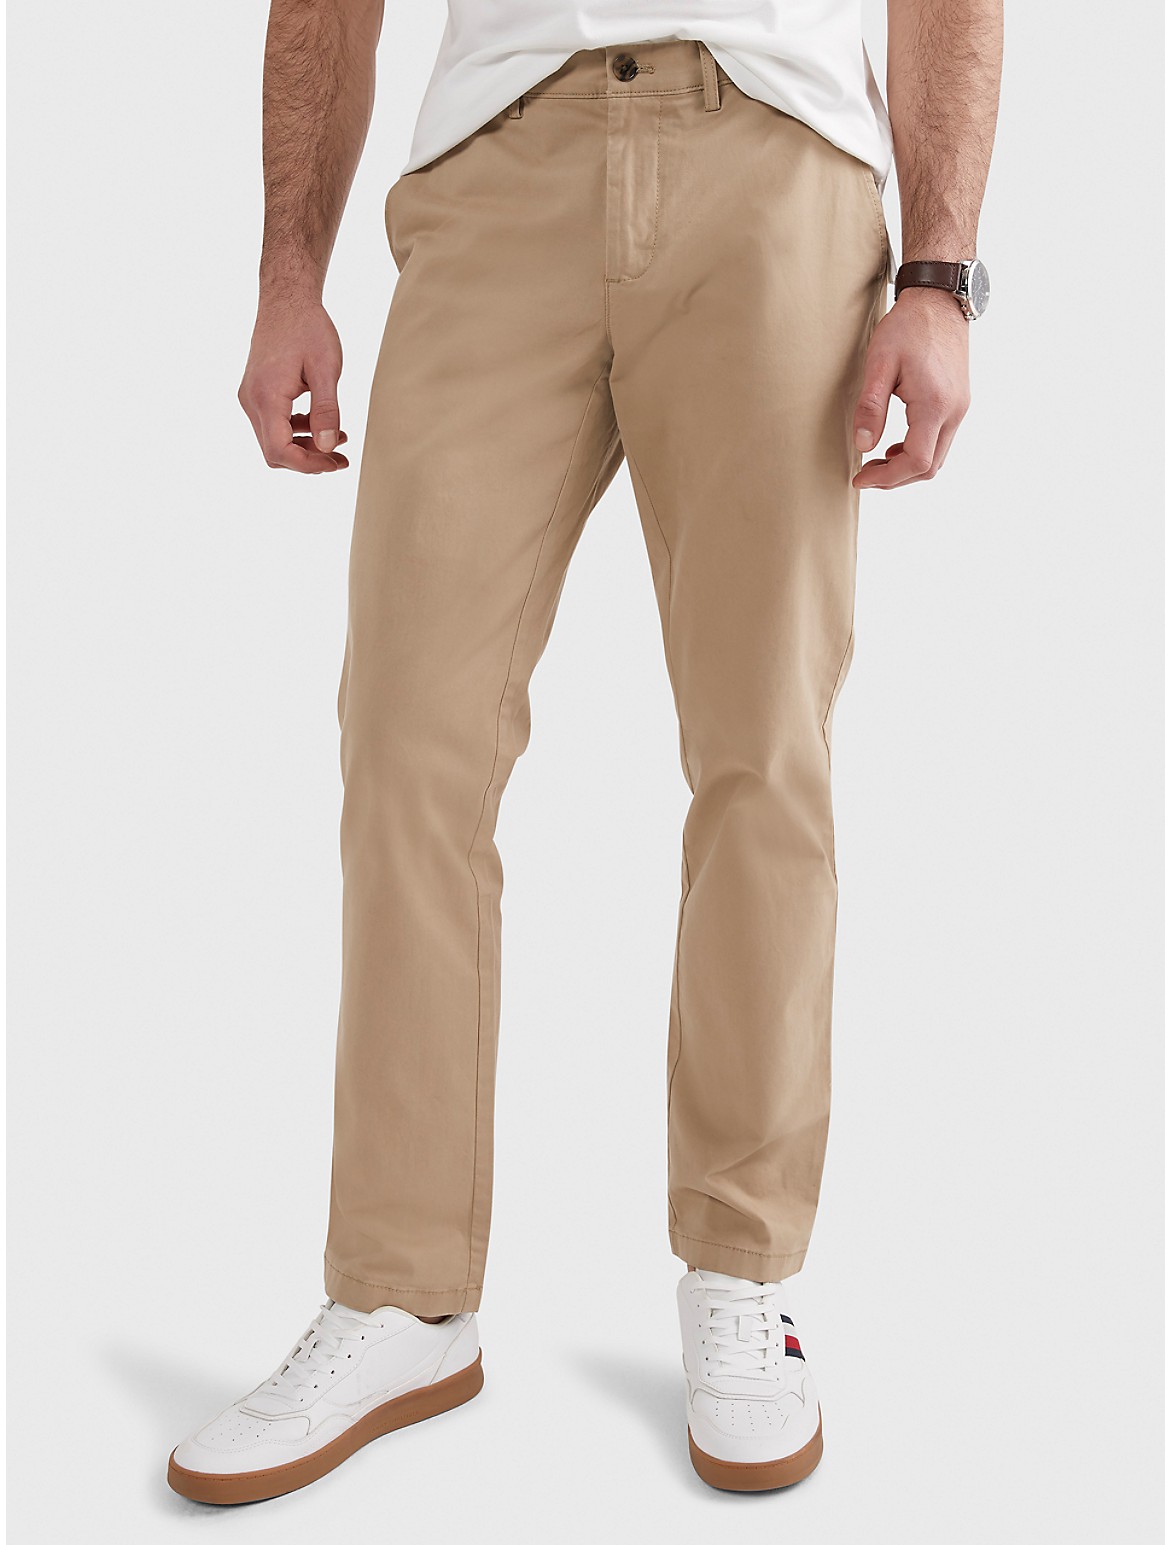 Tommy Hilfiger Custom Fit Comfort Stretch Chino In New Vintage Khaki